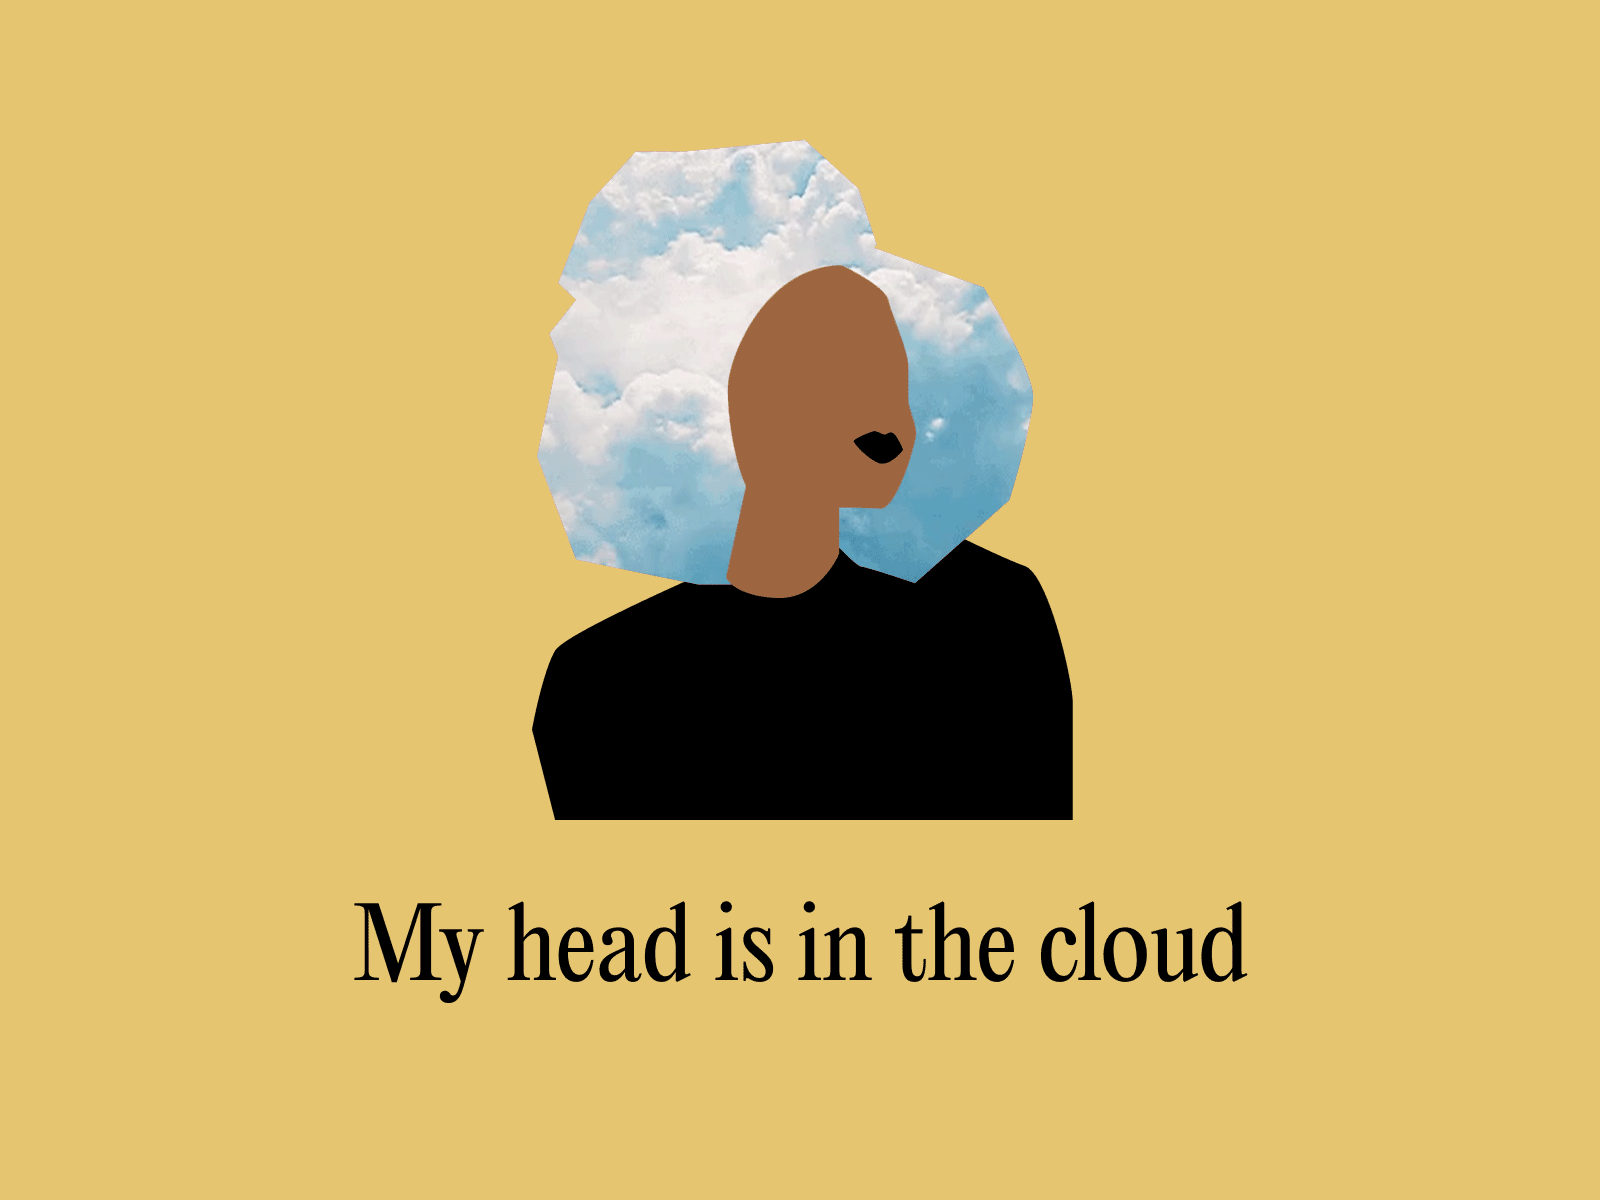 My head is in the cloud